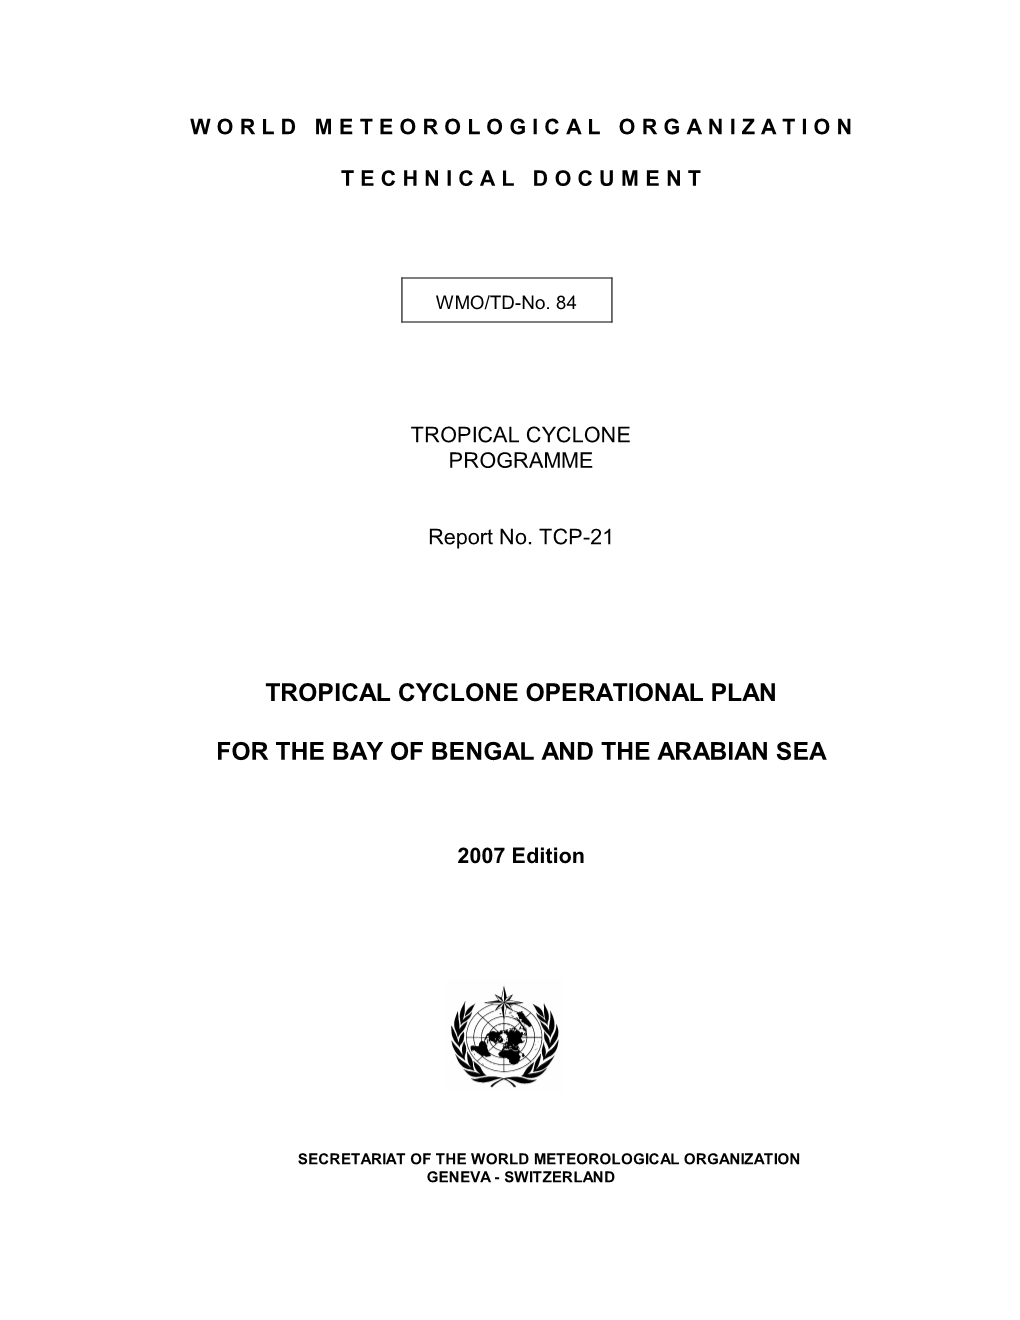 Tropical Cyclone Operational Plan for the Bay of Bengal and the Arabian